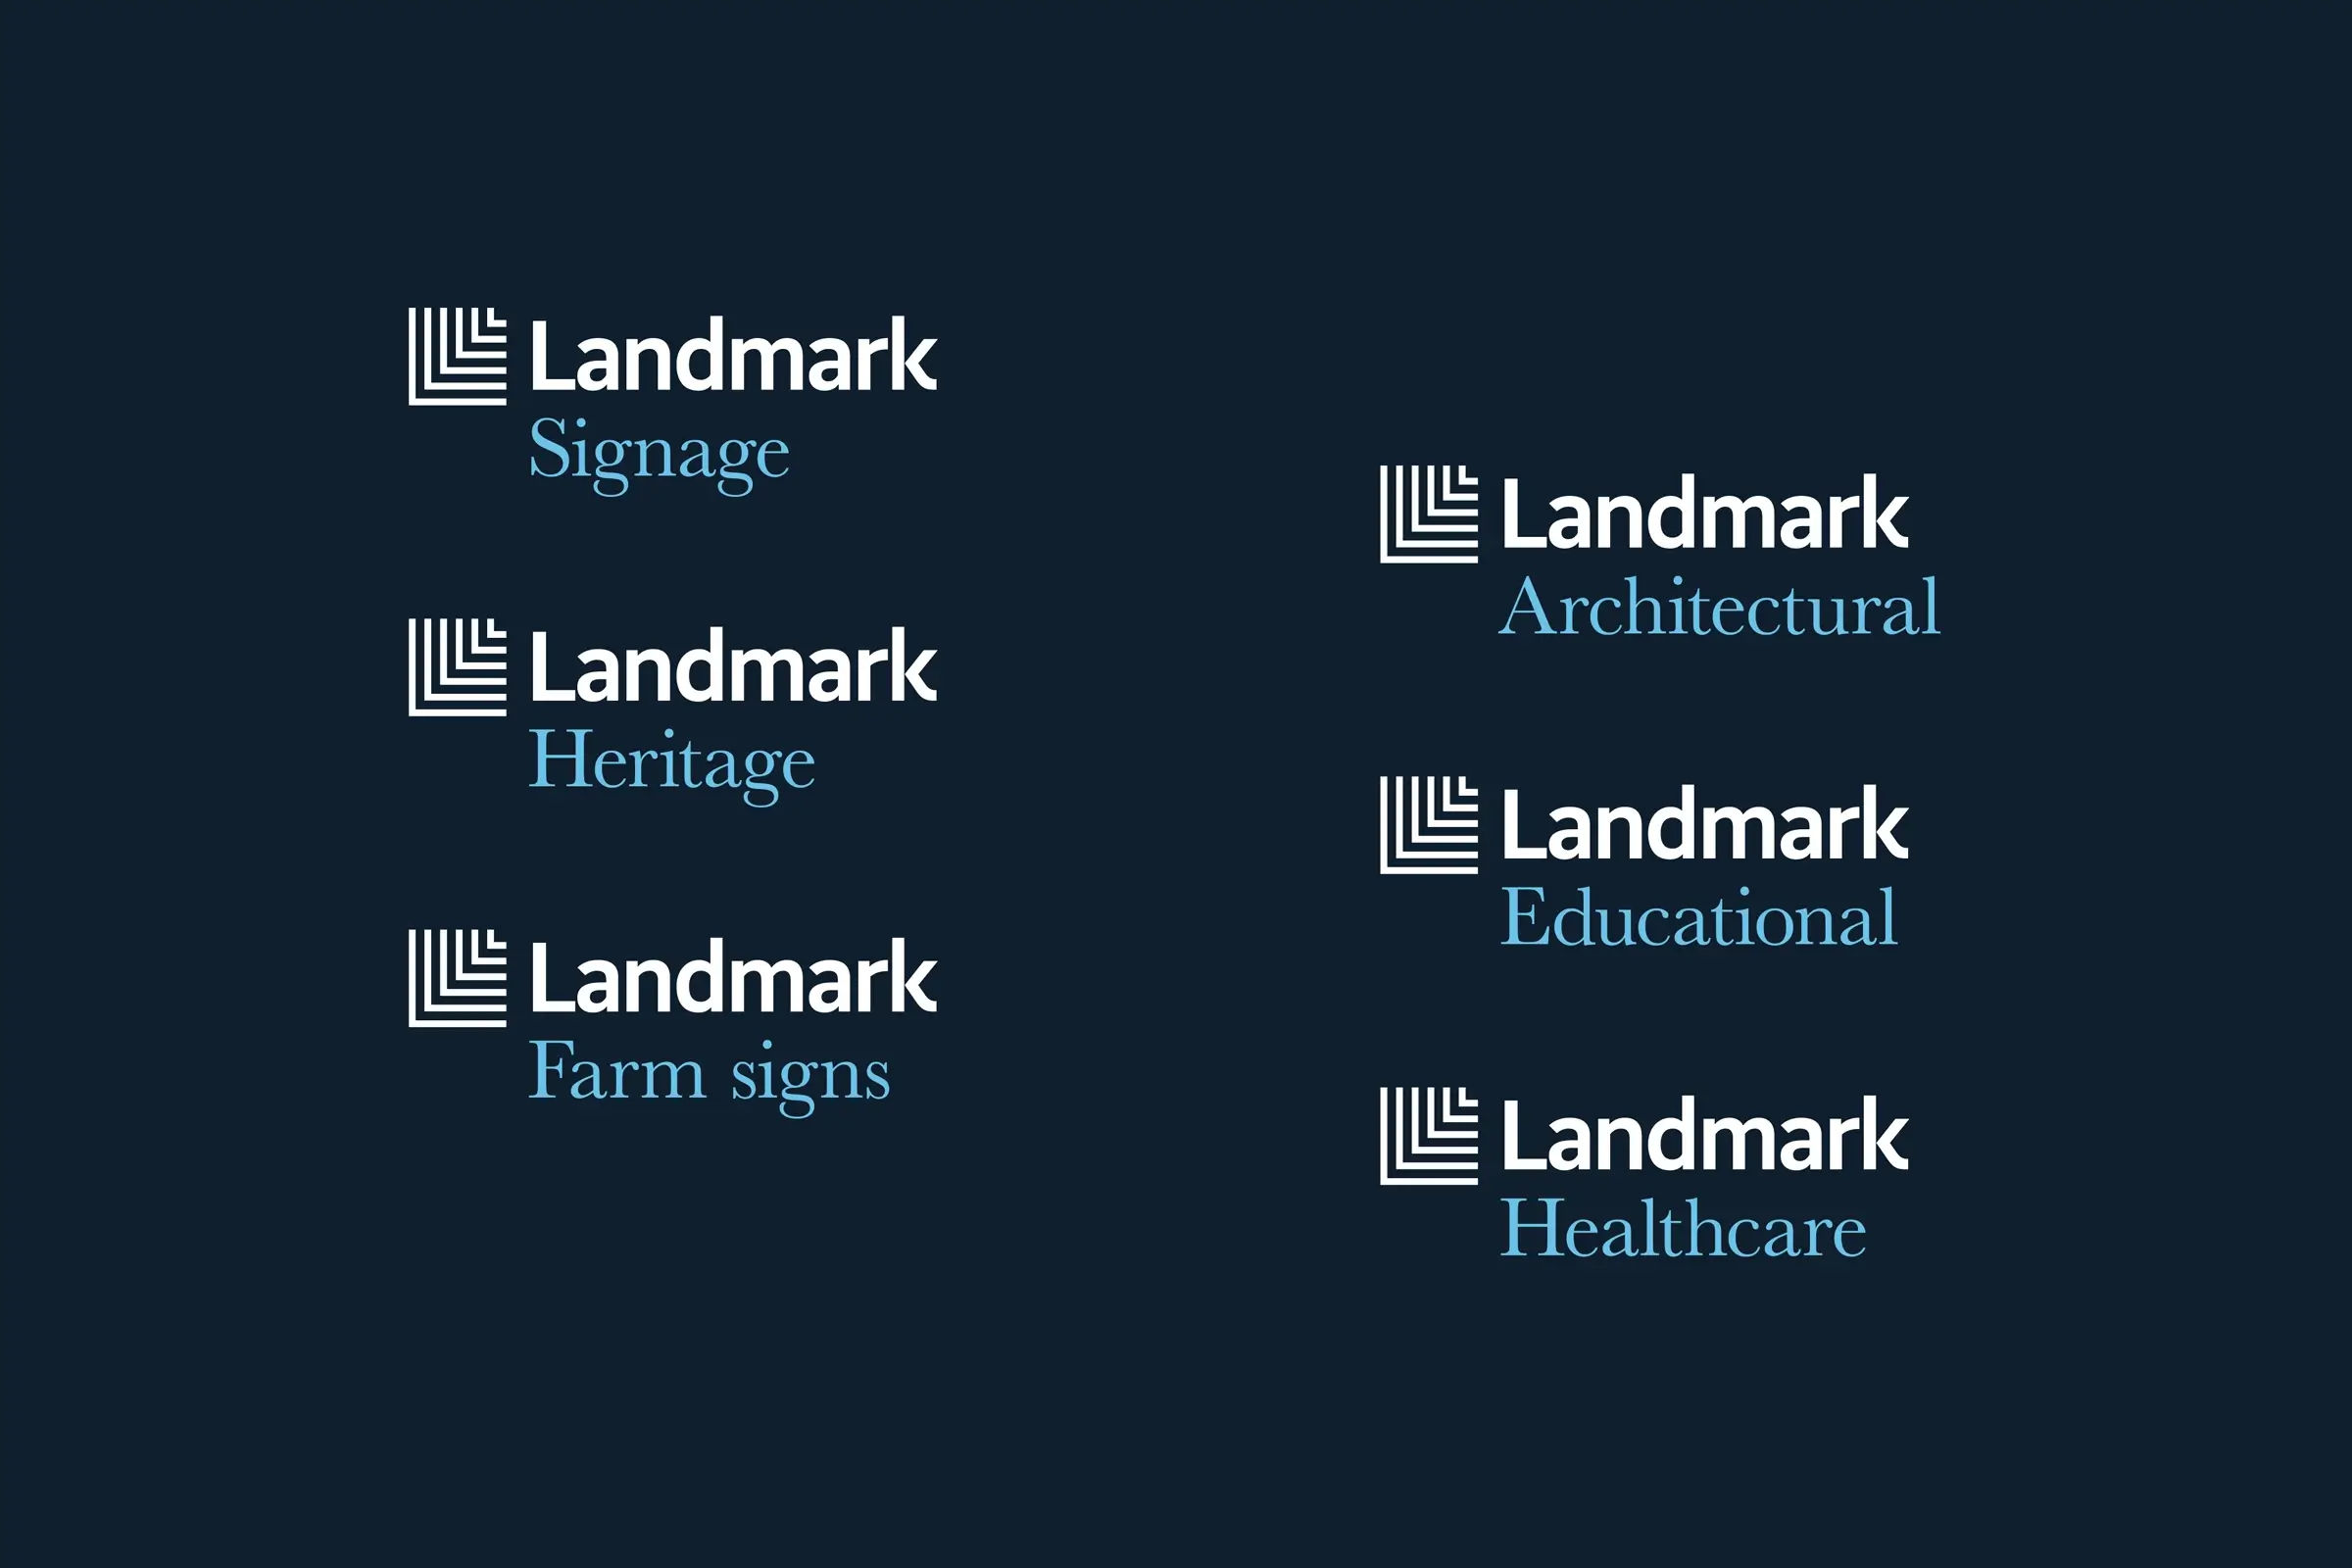 Landmark - Sub brands for each service by Peek Creative Limited